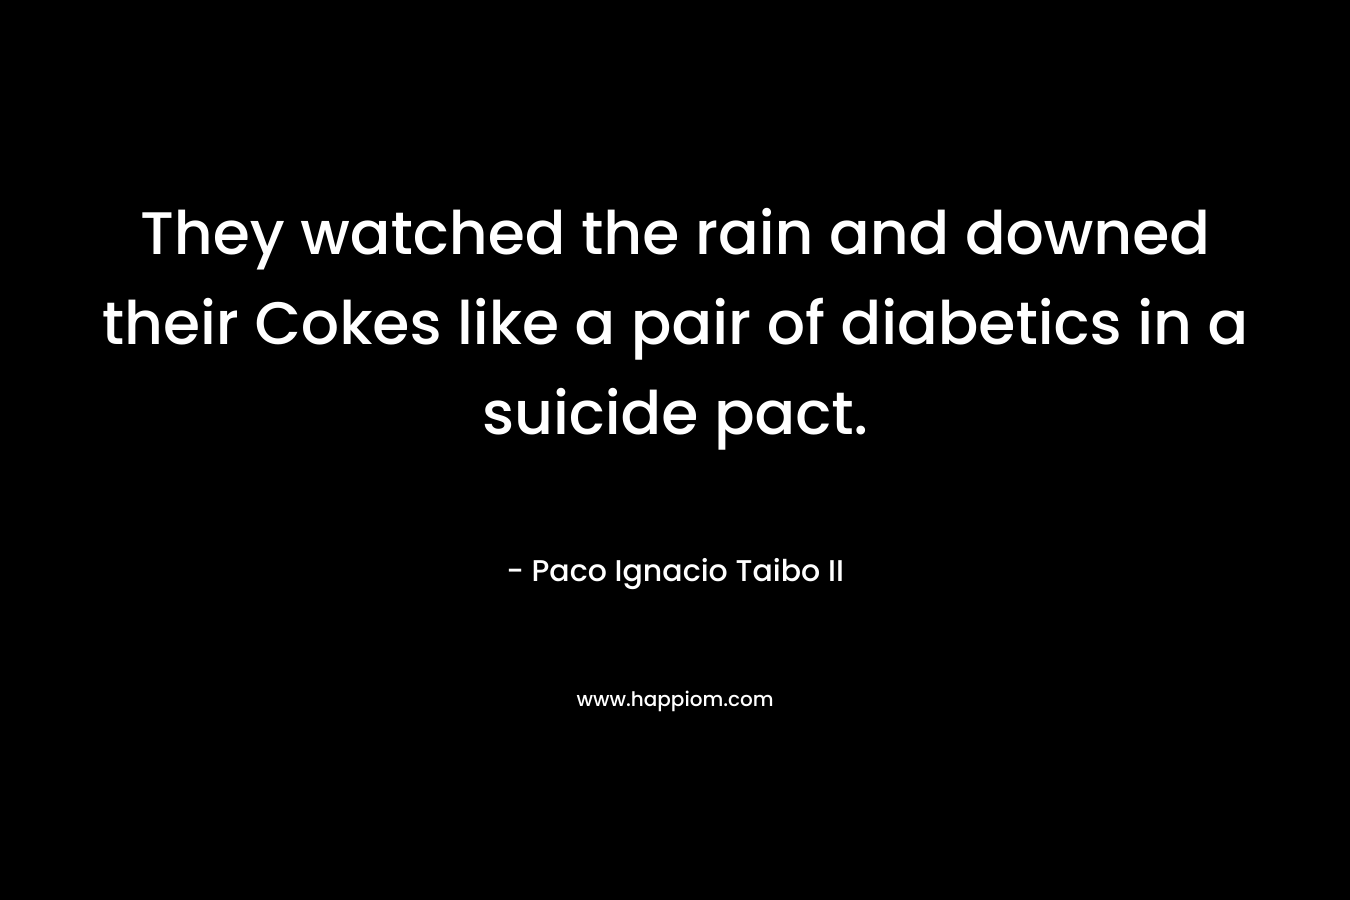 They watched the rain and downed their Cokes like a pair of diabetics in a suicide pact. – Paco Ignacio Taibo II